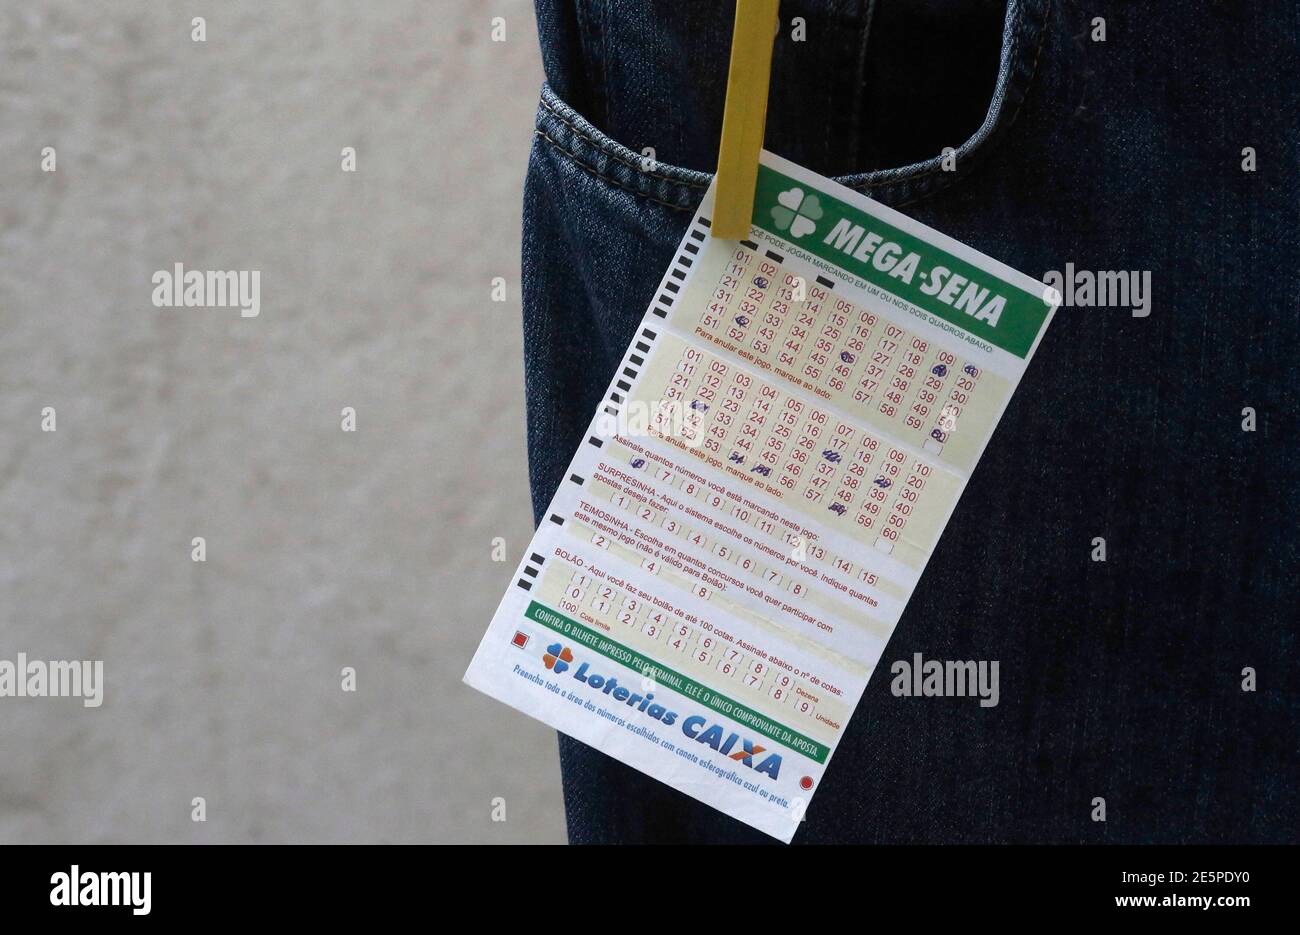 A Mega Sena lottery ticket is displayed in Sao Paulo January 18, 2014.  Brazilian police said on Saturday that they had broken up a bank robbery  scheme that had diverted 73 million